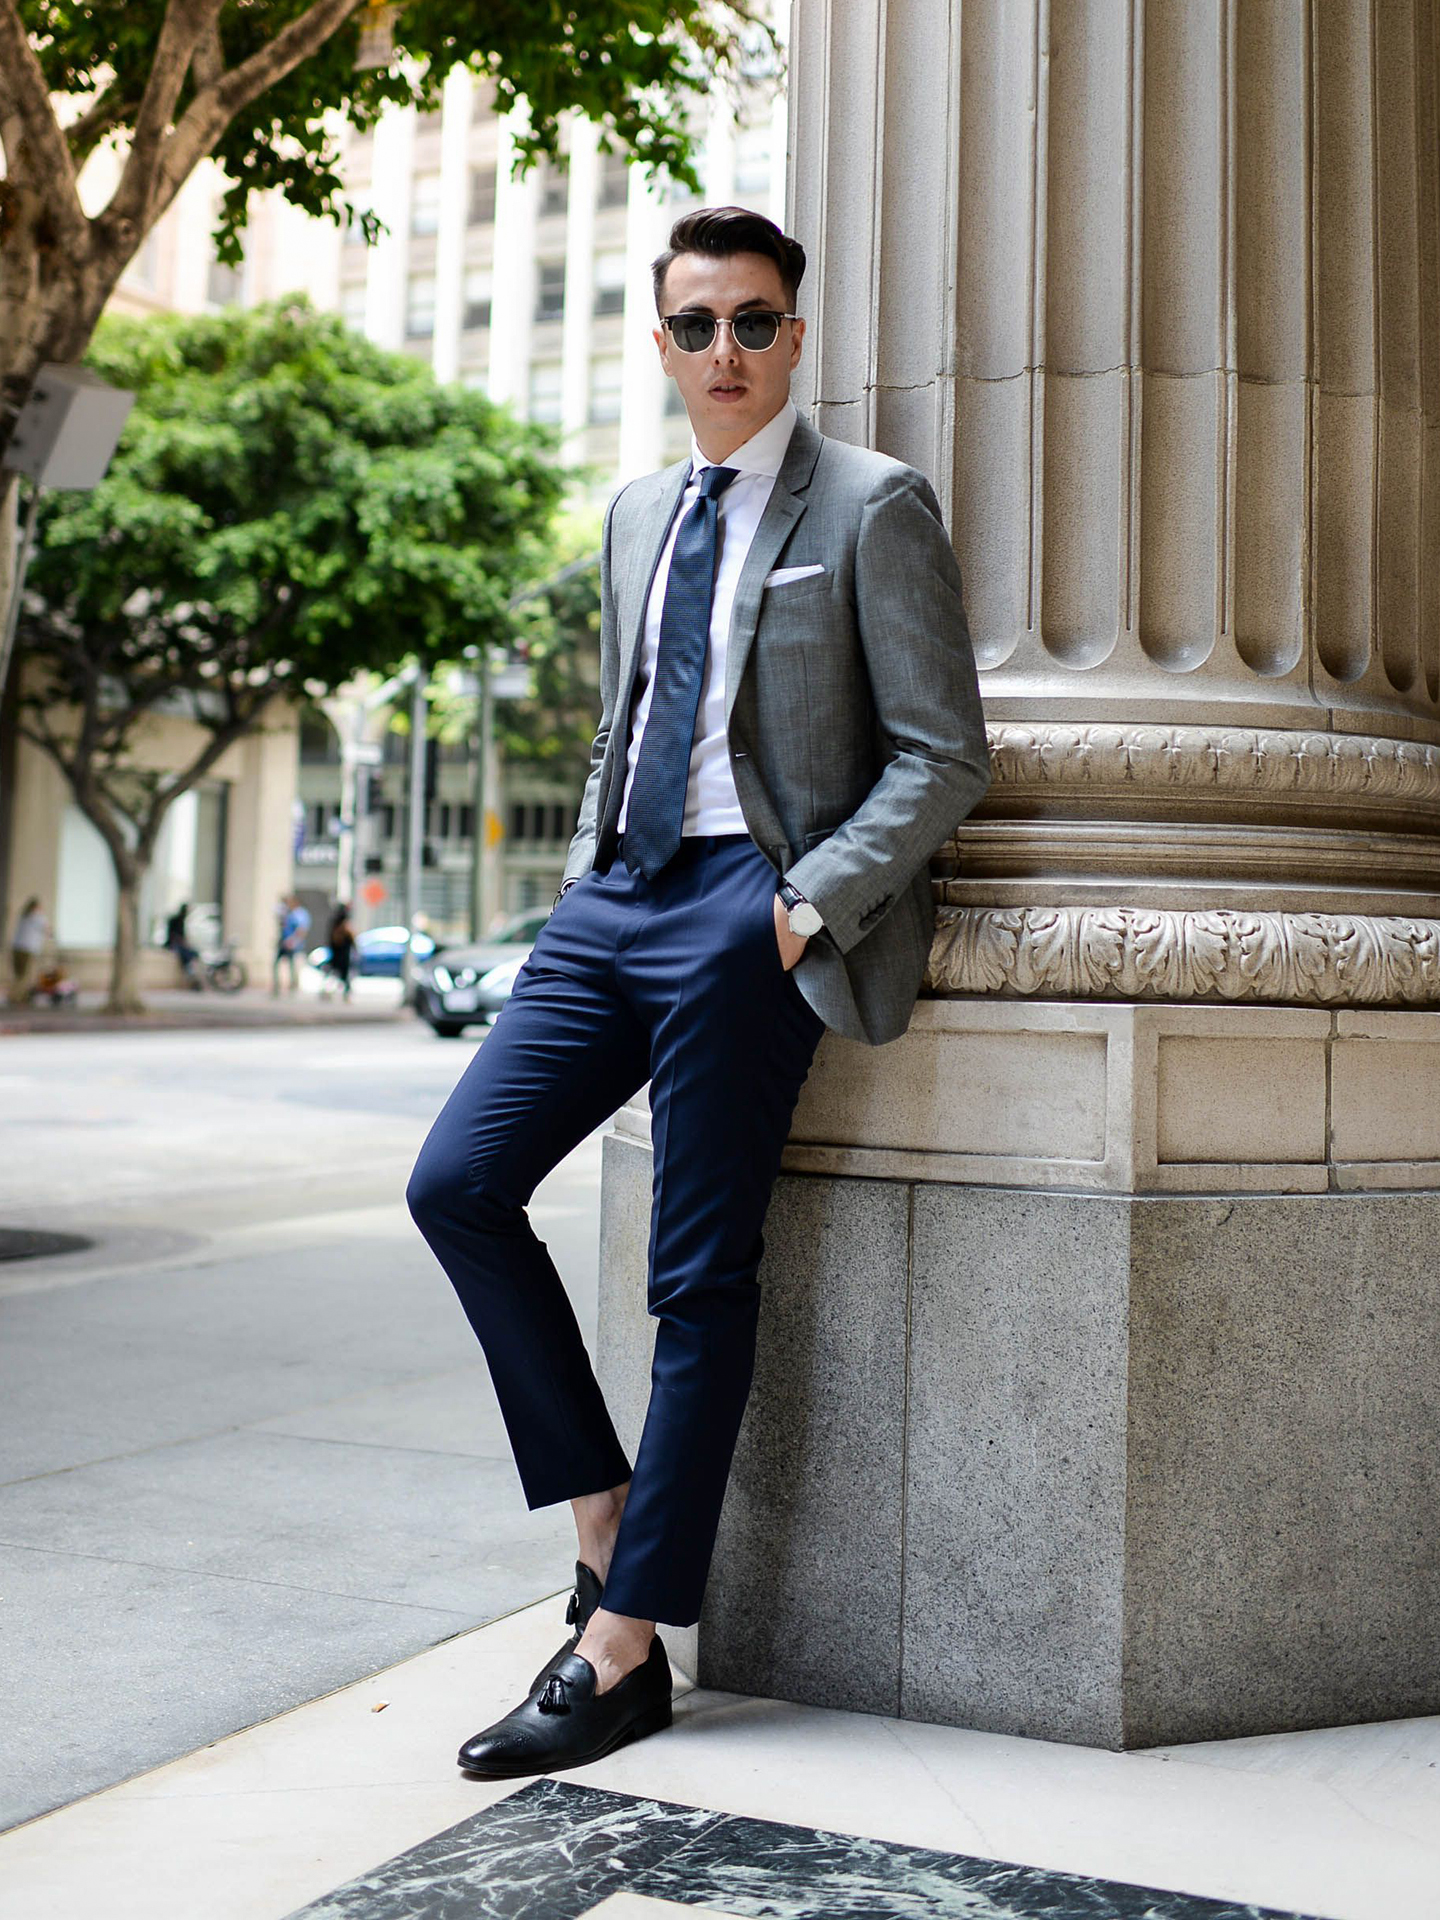 Grey blazer, white shirt, blue tie, navy trousers, and black loafers